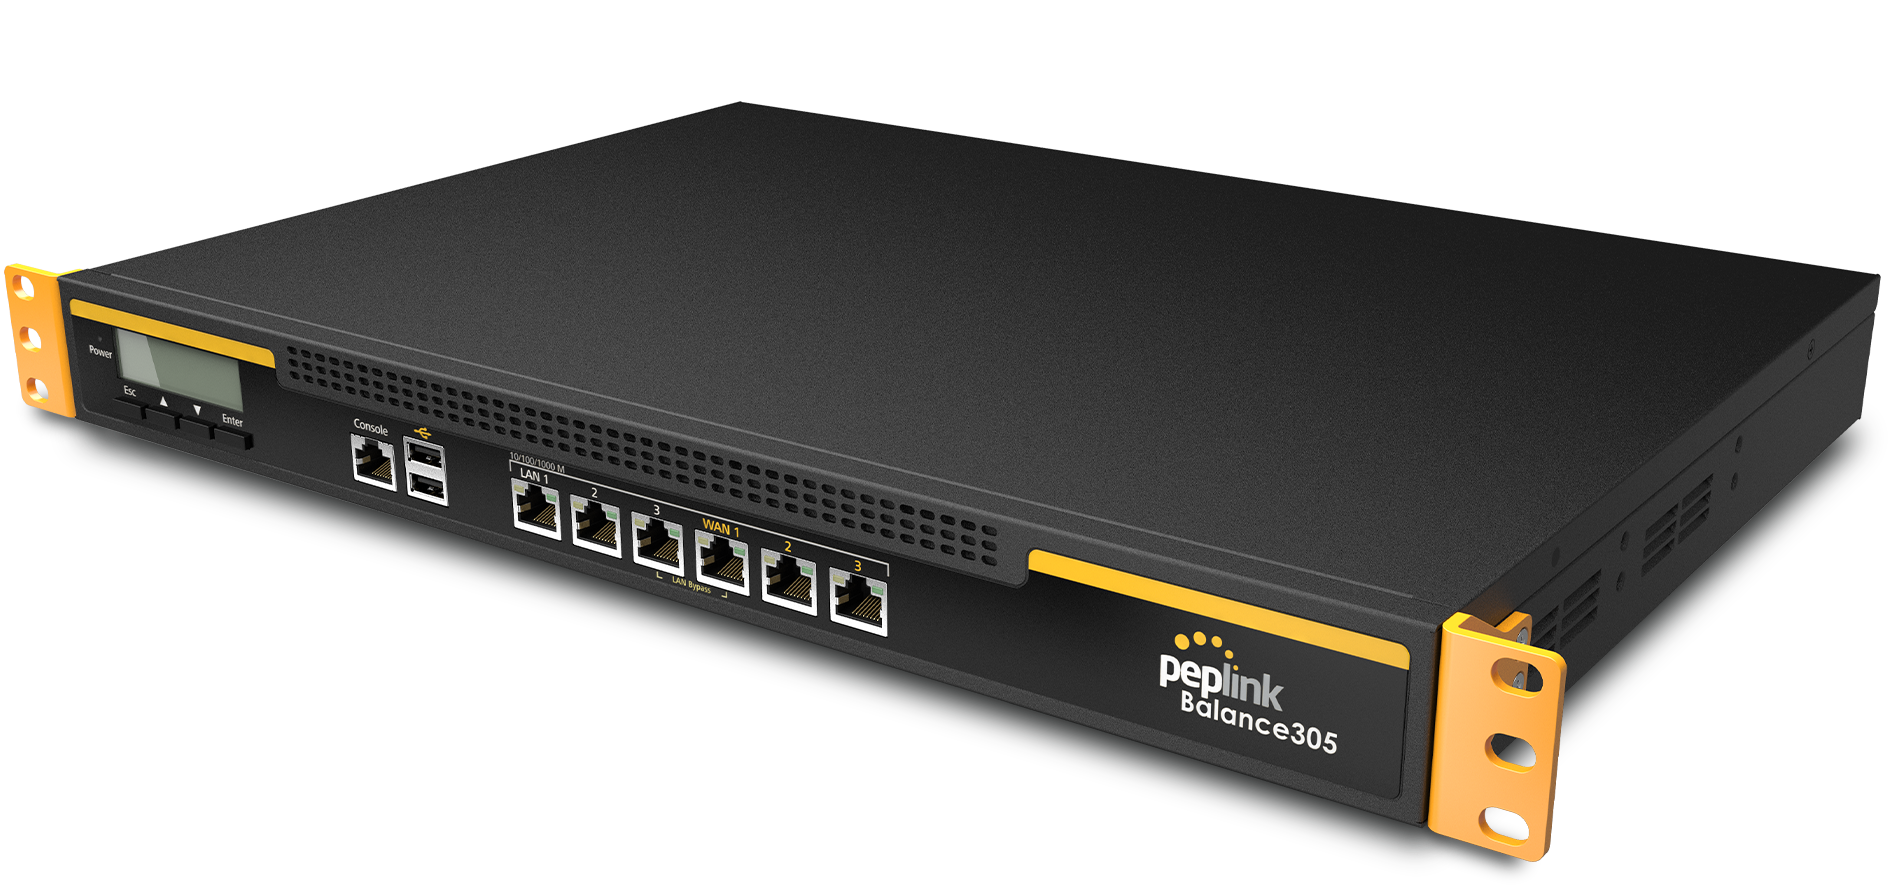 1Gbps Multi-WAN (3 Ports) Router Balance 305 #2